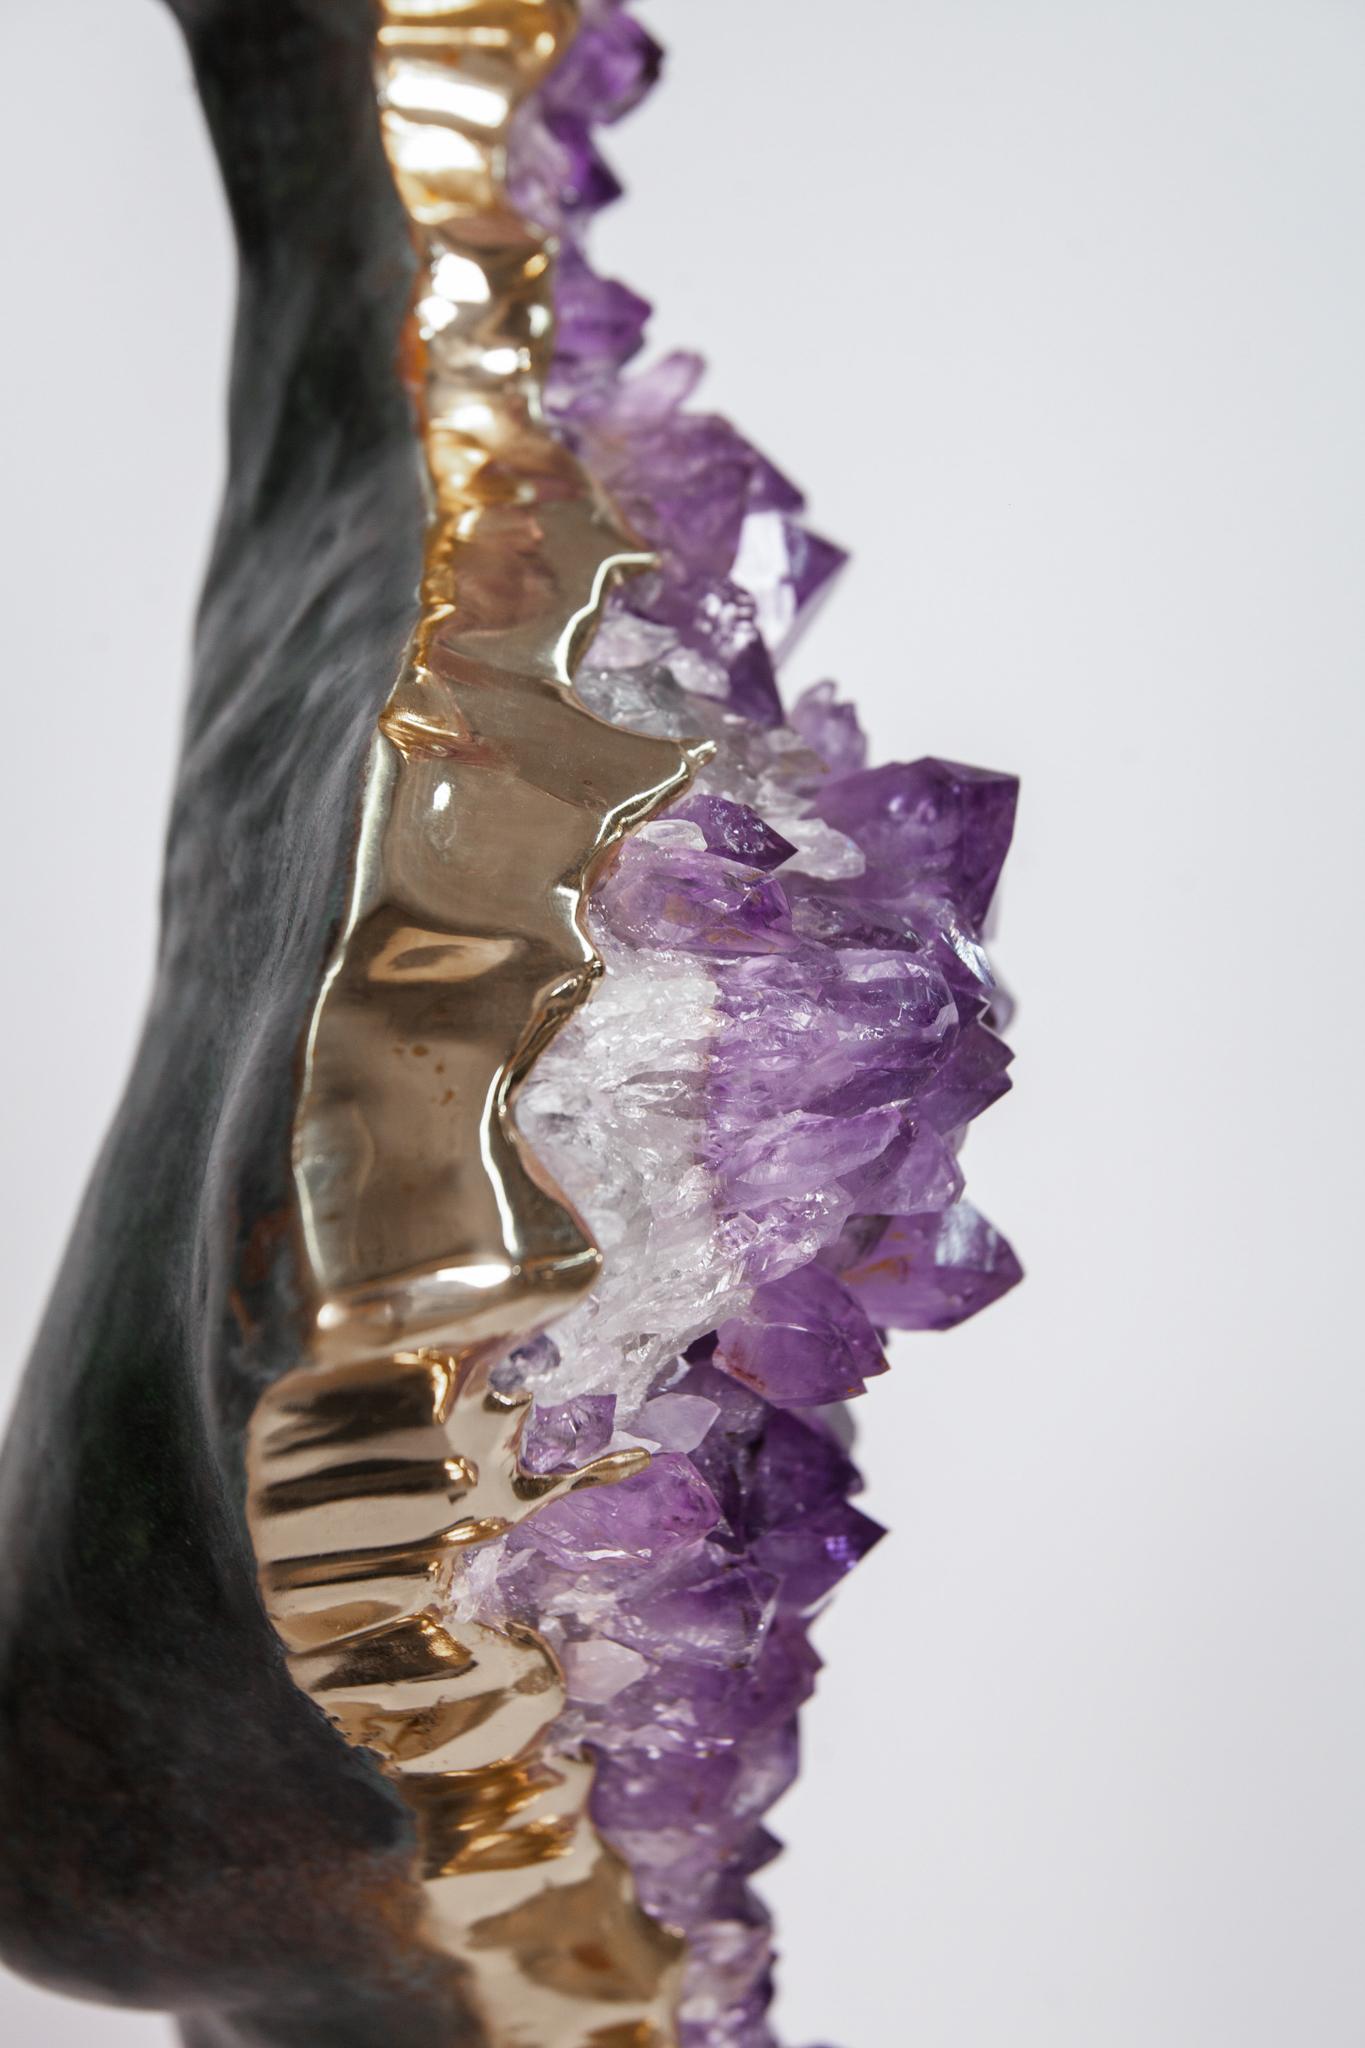 LIMINAL STATE  Amethyst crystals, bronze sculpture For Sale 11